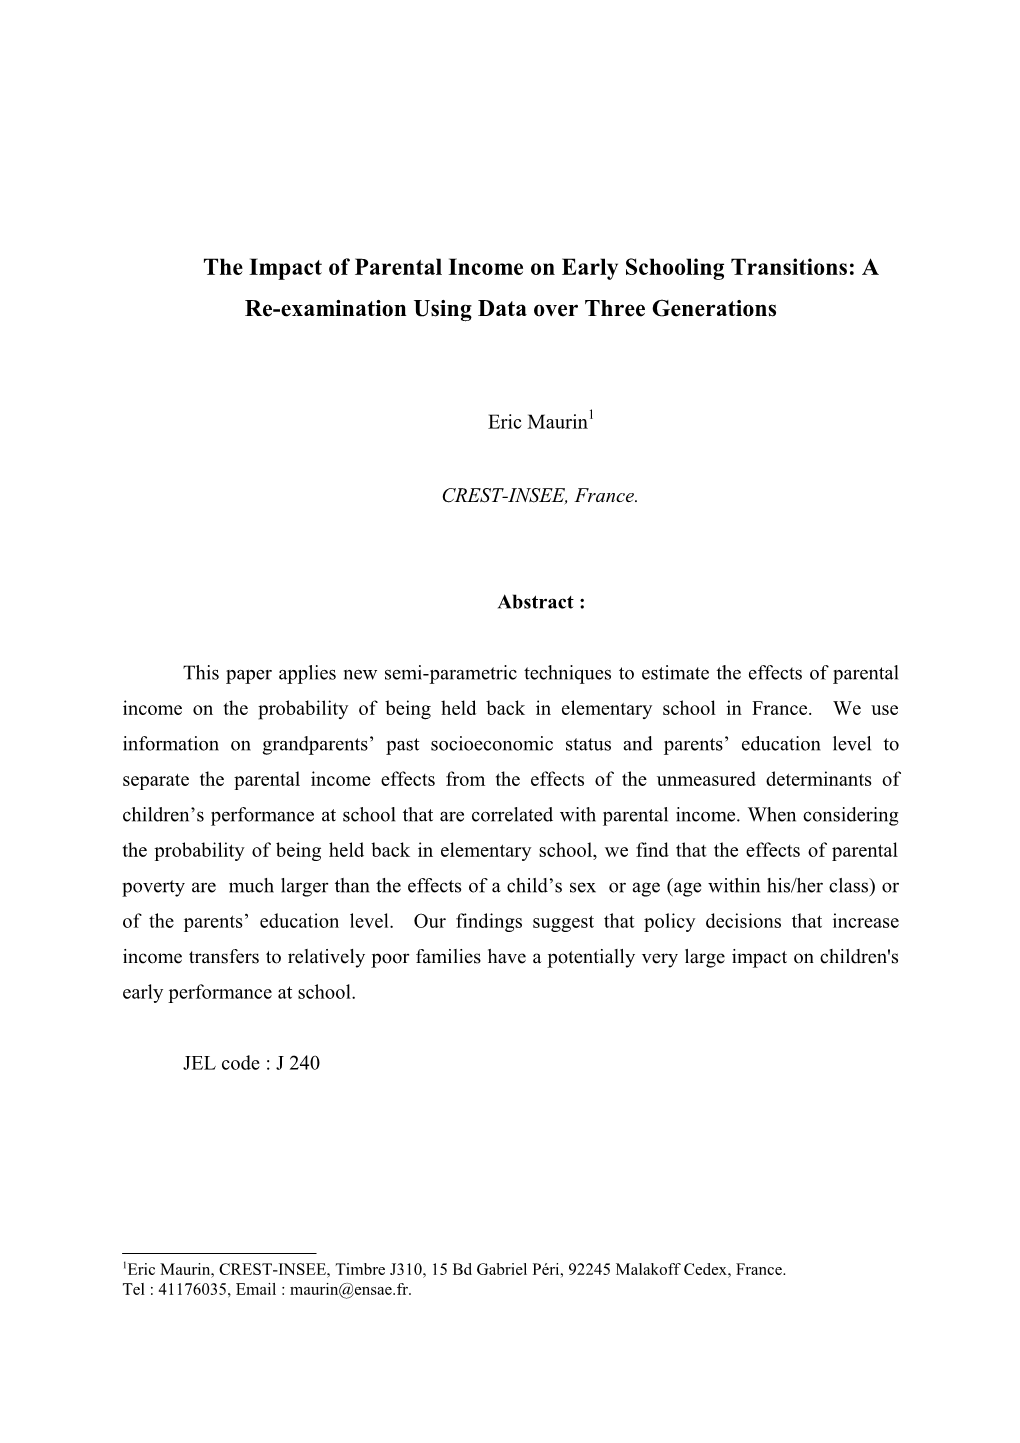 Table 2: the Effect of Low Parental Income on the Probability of Being Held Back in Primary